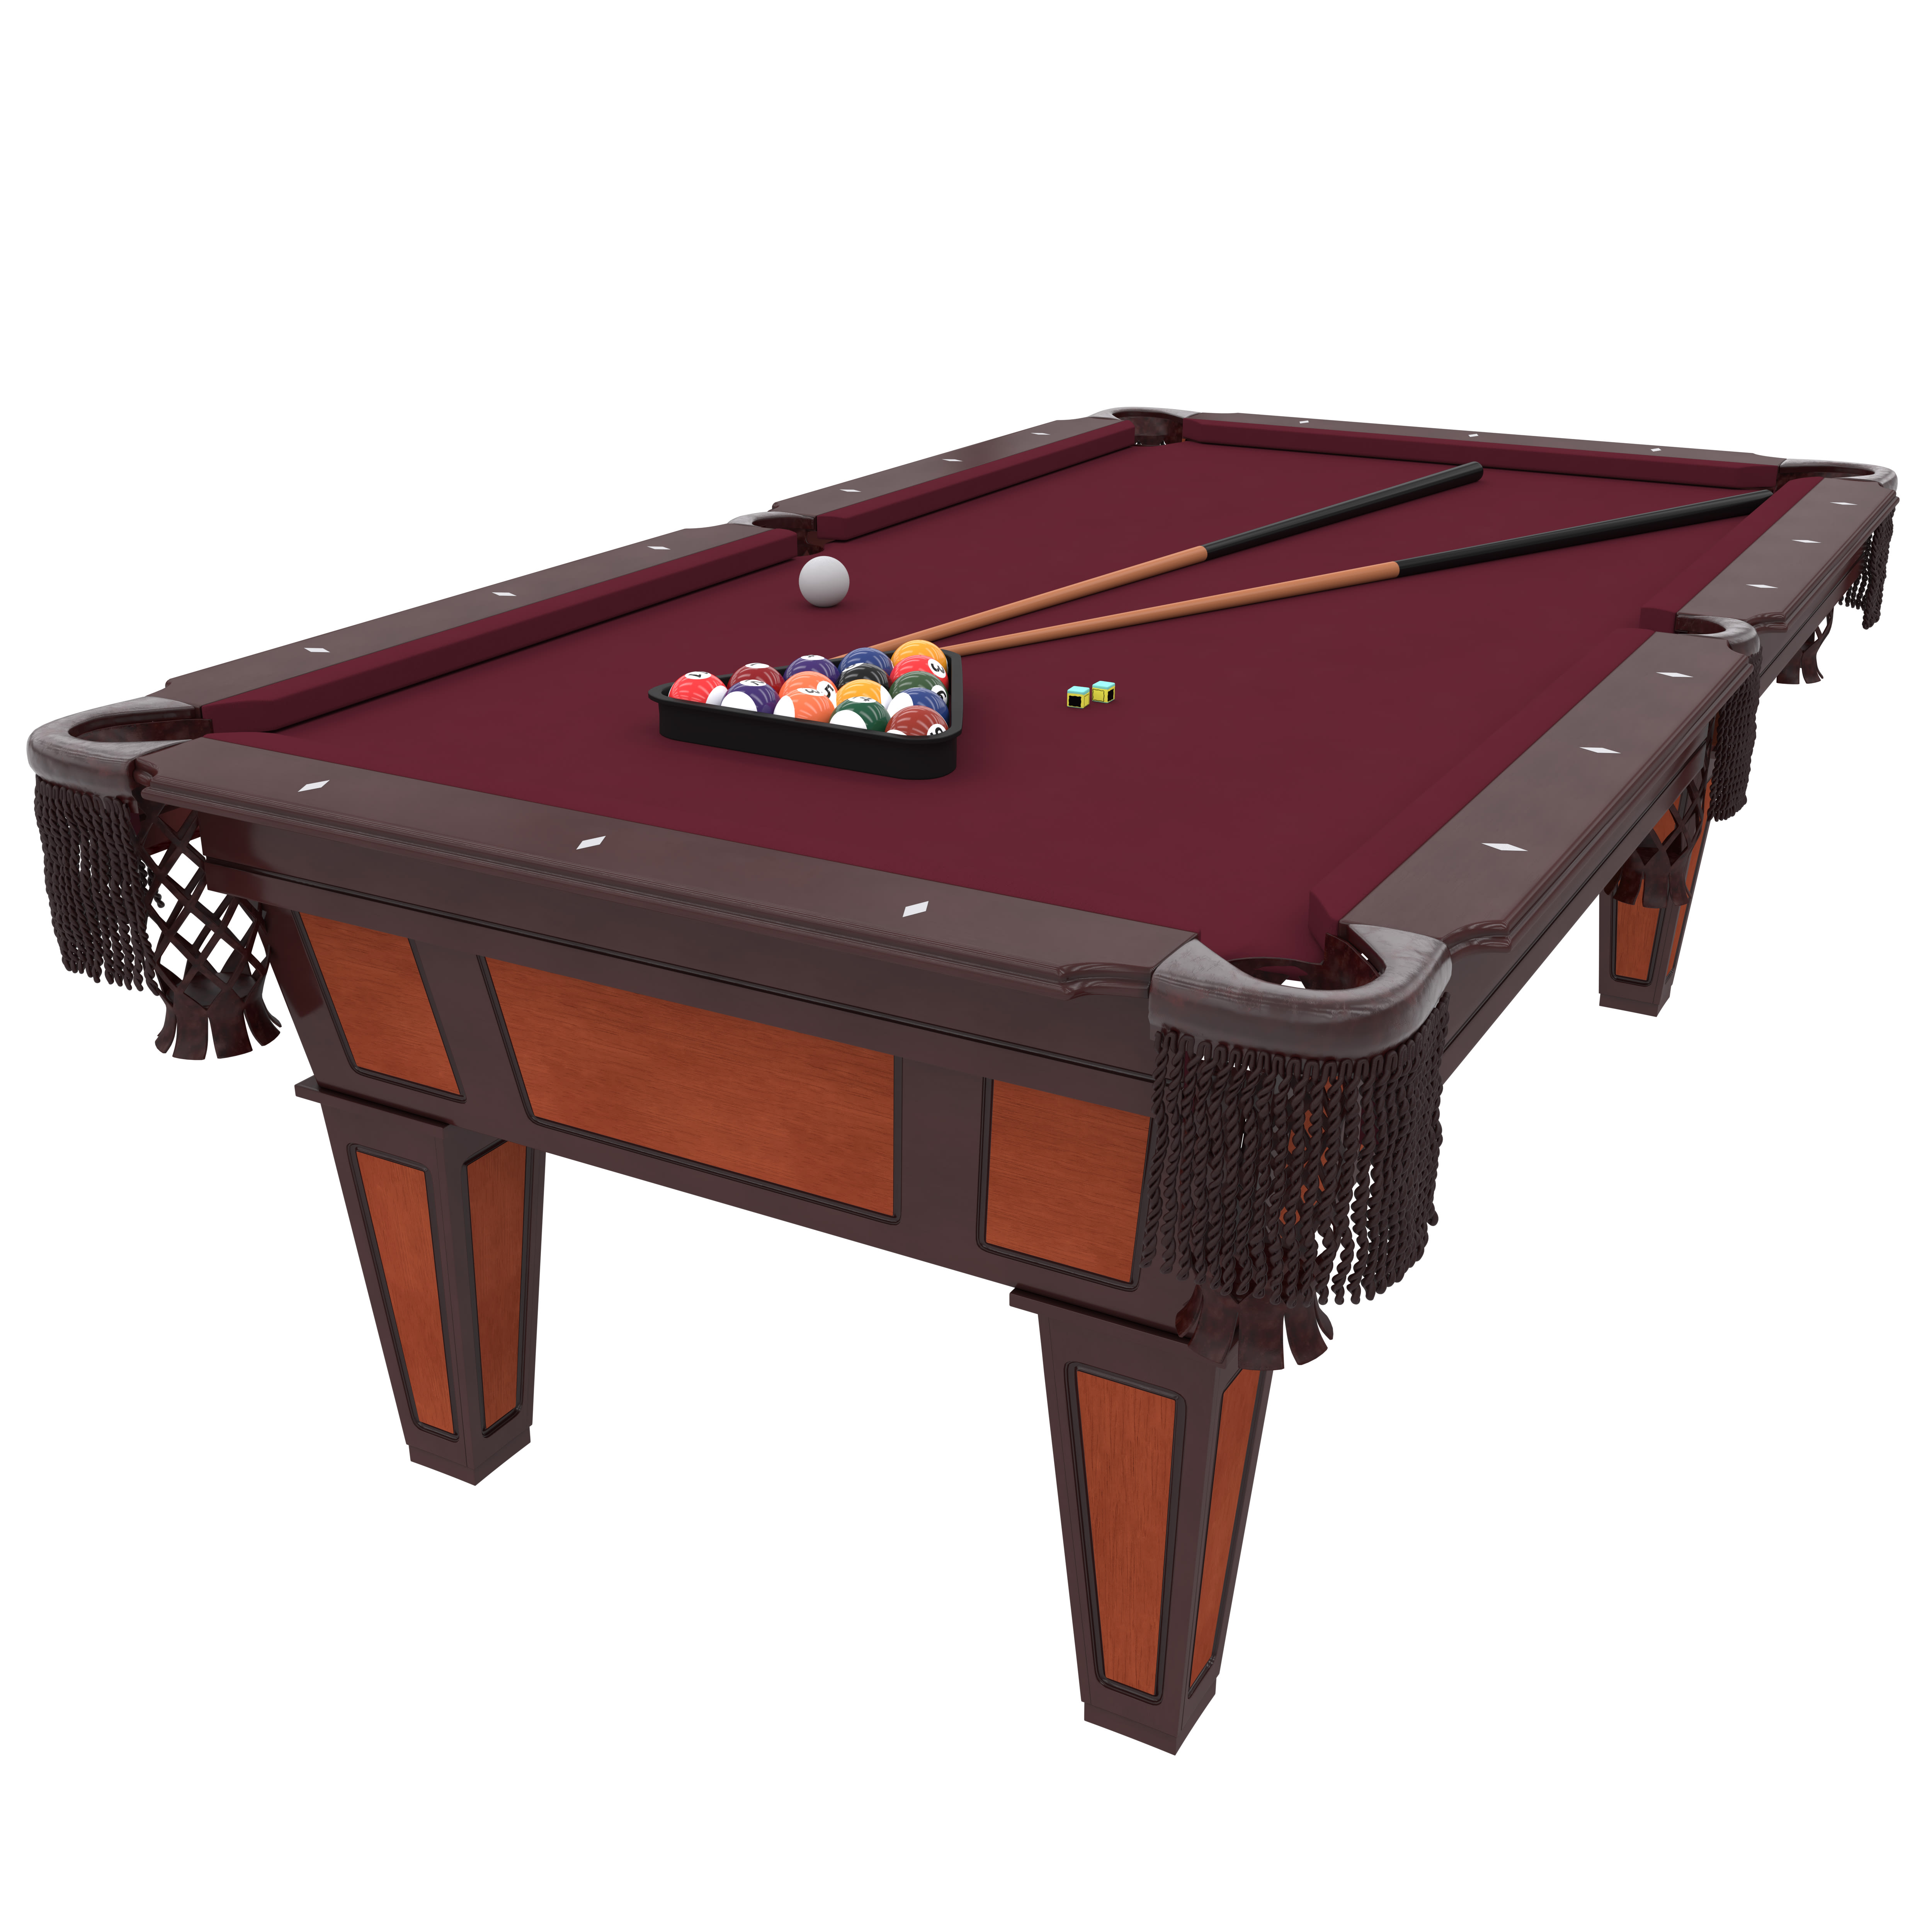 Fat Cat Reno 7.5' Pool Table with Pool Cues and Accessories - image 1 of 13